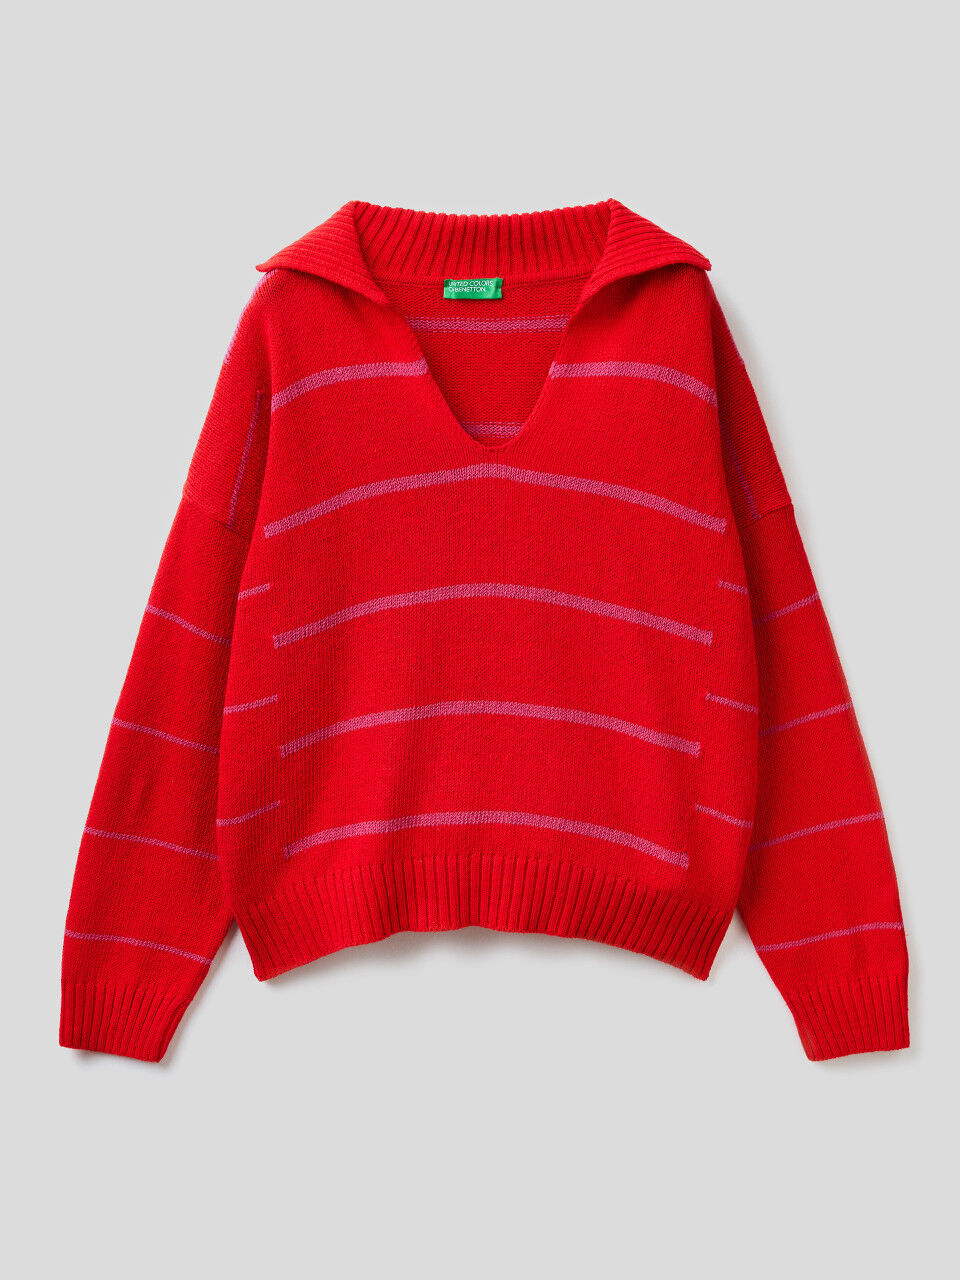 United Colors of Benetton Girls L/S Sweater Jumper 